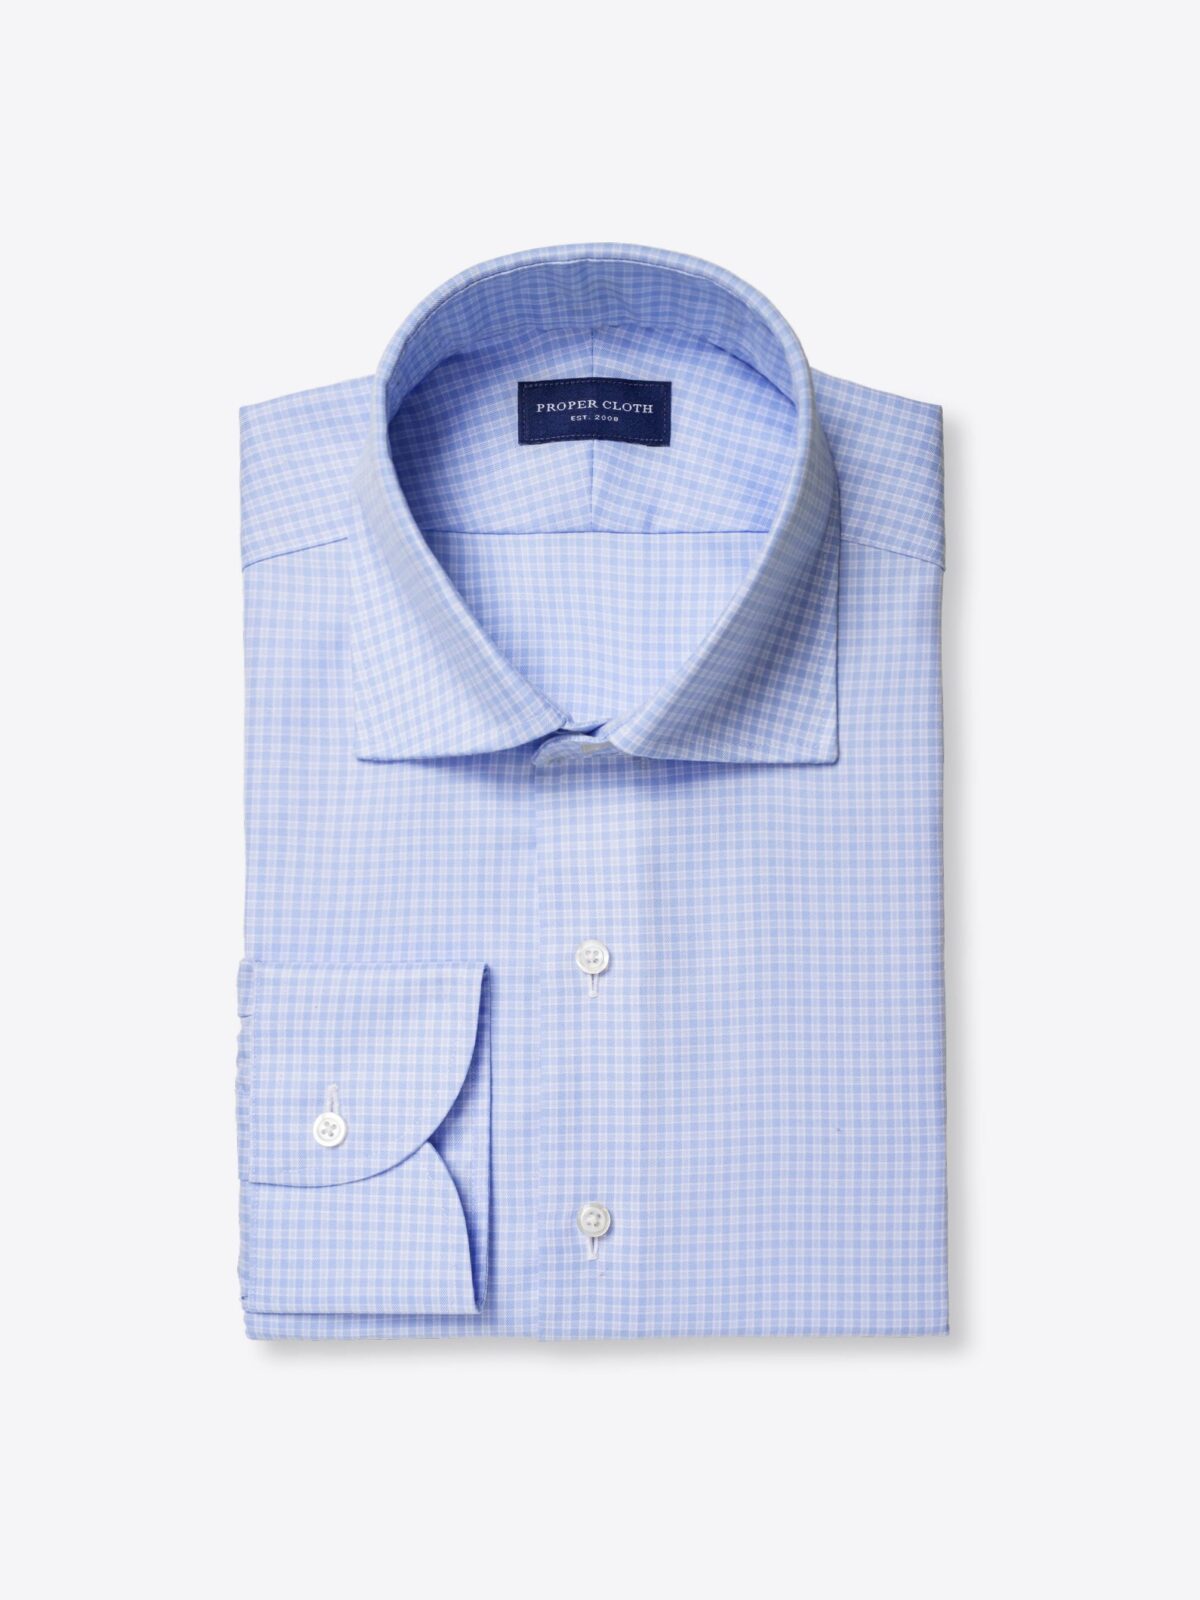 Mayfair Wrinkle-Resistant Light Blue Micro Check Shirt by Proper Cloth